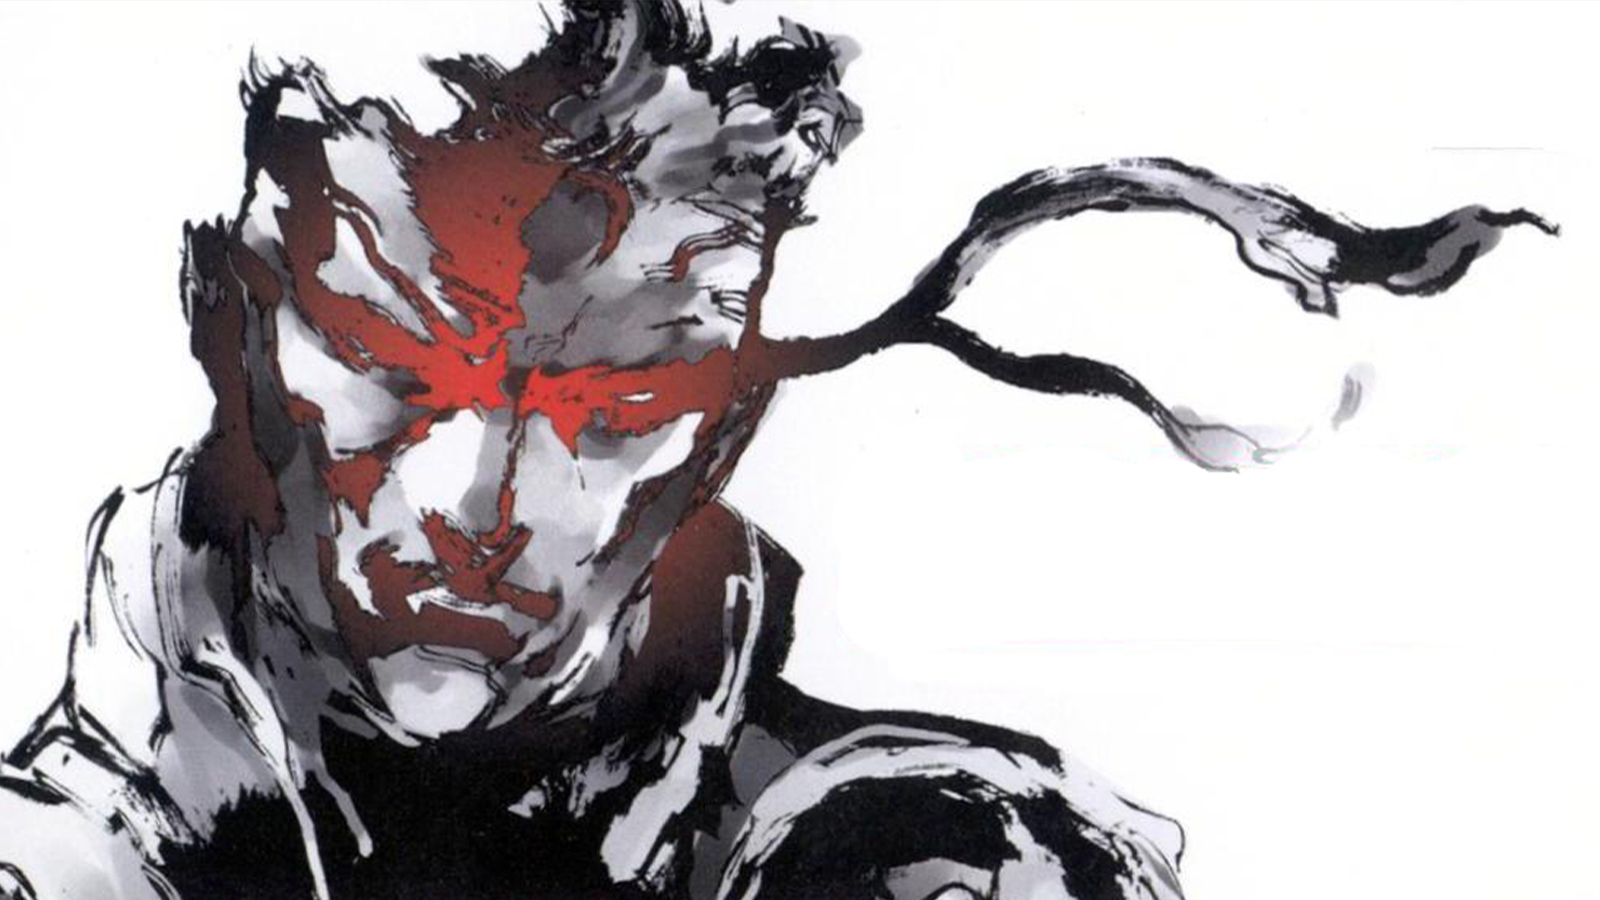 Who was the real Greatest Soldier - The Boss, Big Boss, or Solid Snake? |  NeoGAF